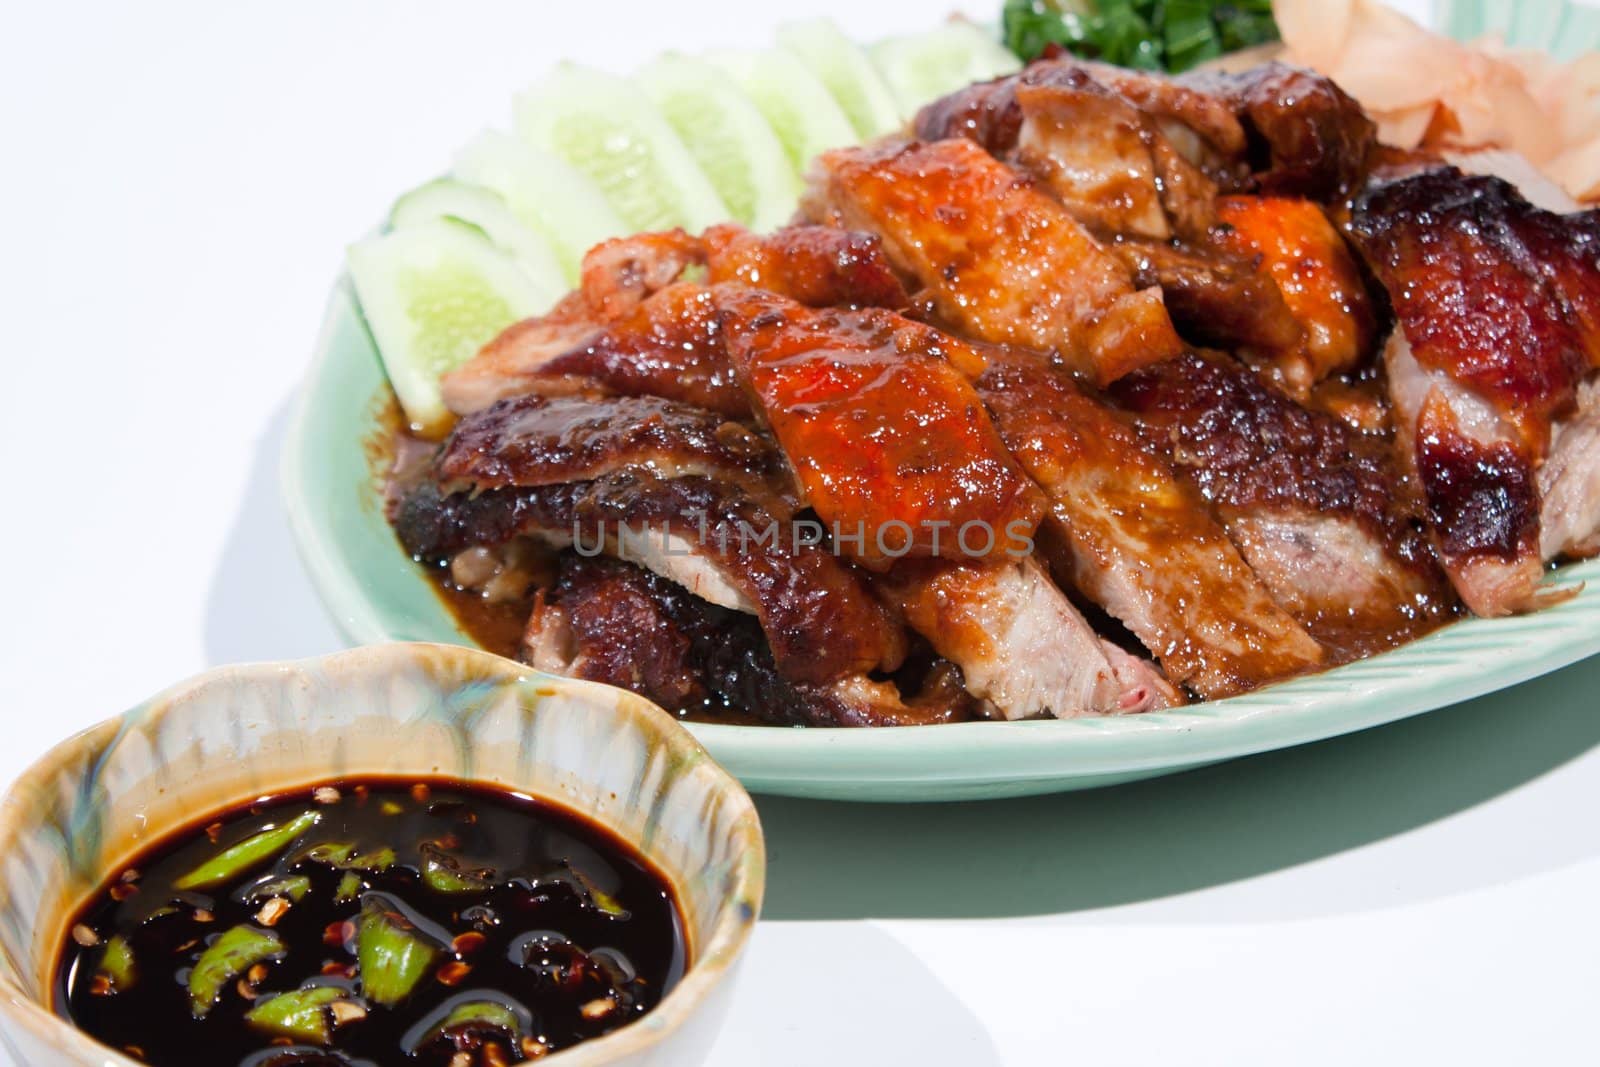 Roast Duck Thai food. Arrange on a plate to be palatable Placed on a white background.